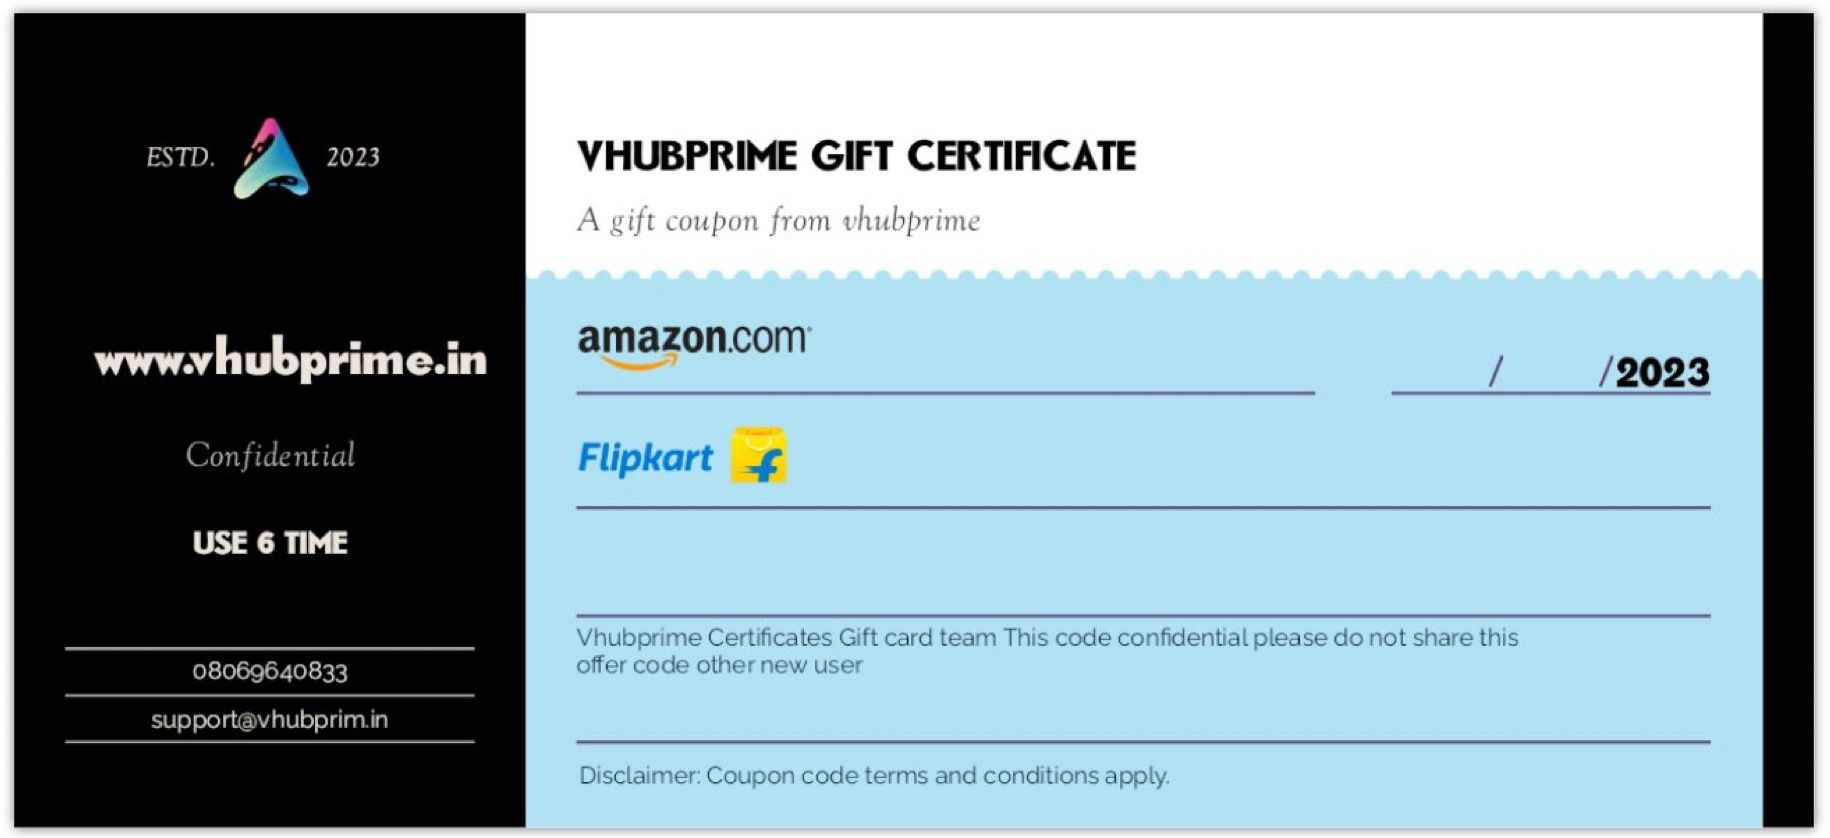 Amazon gift card: The perfect corporate gift